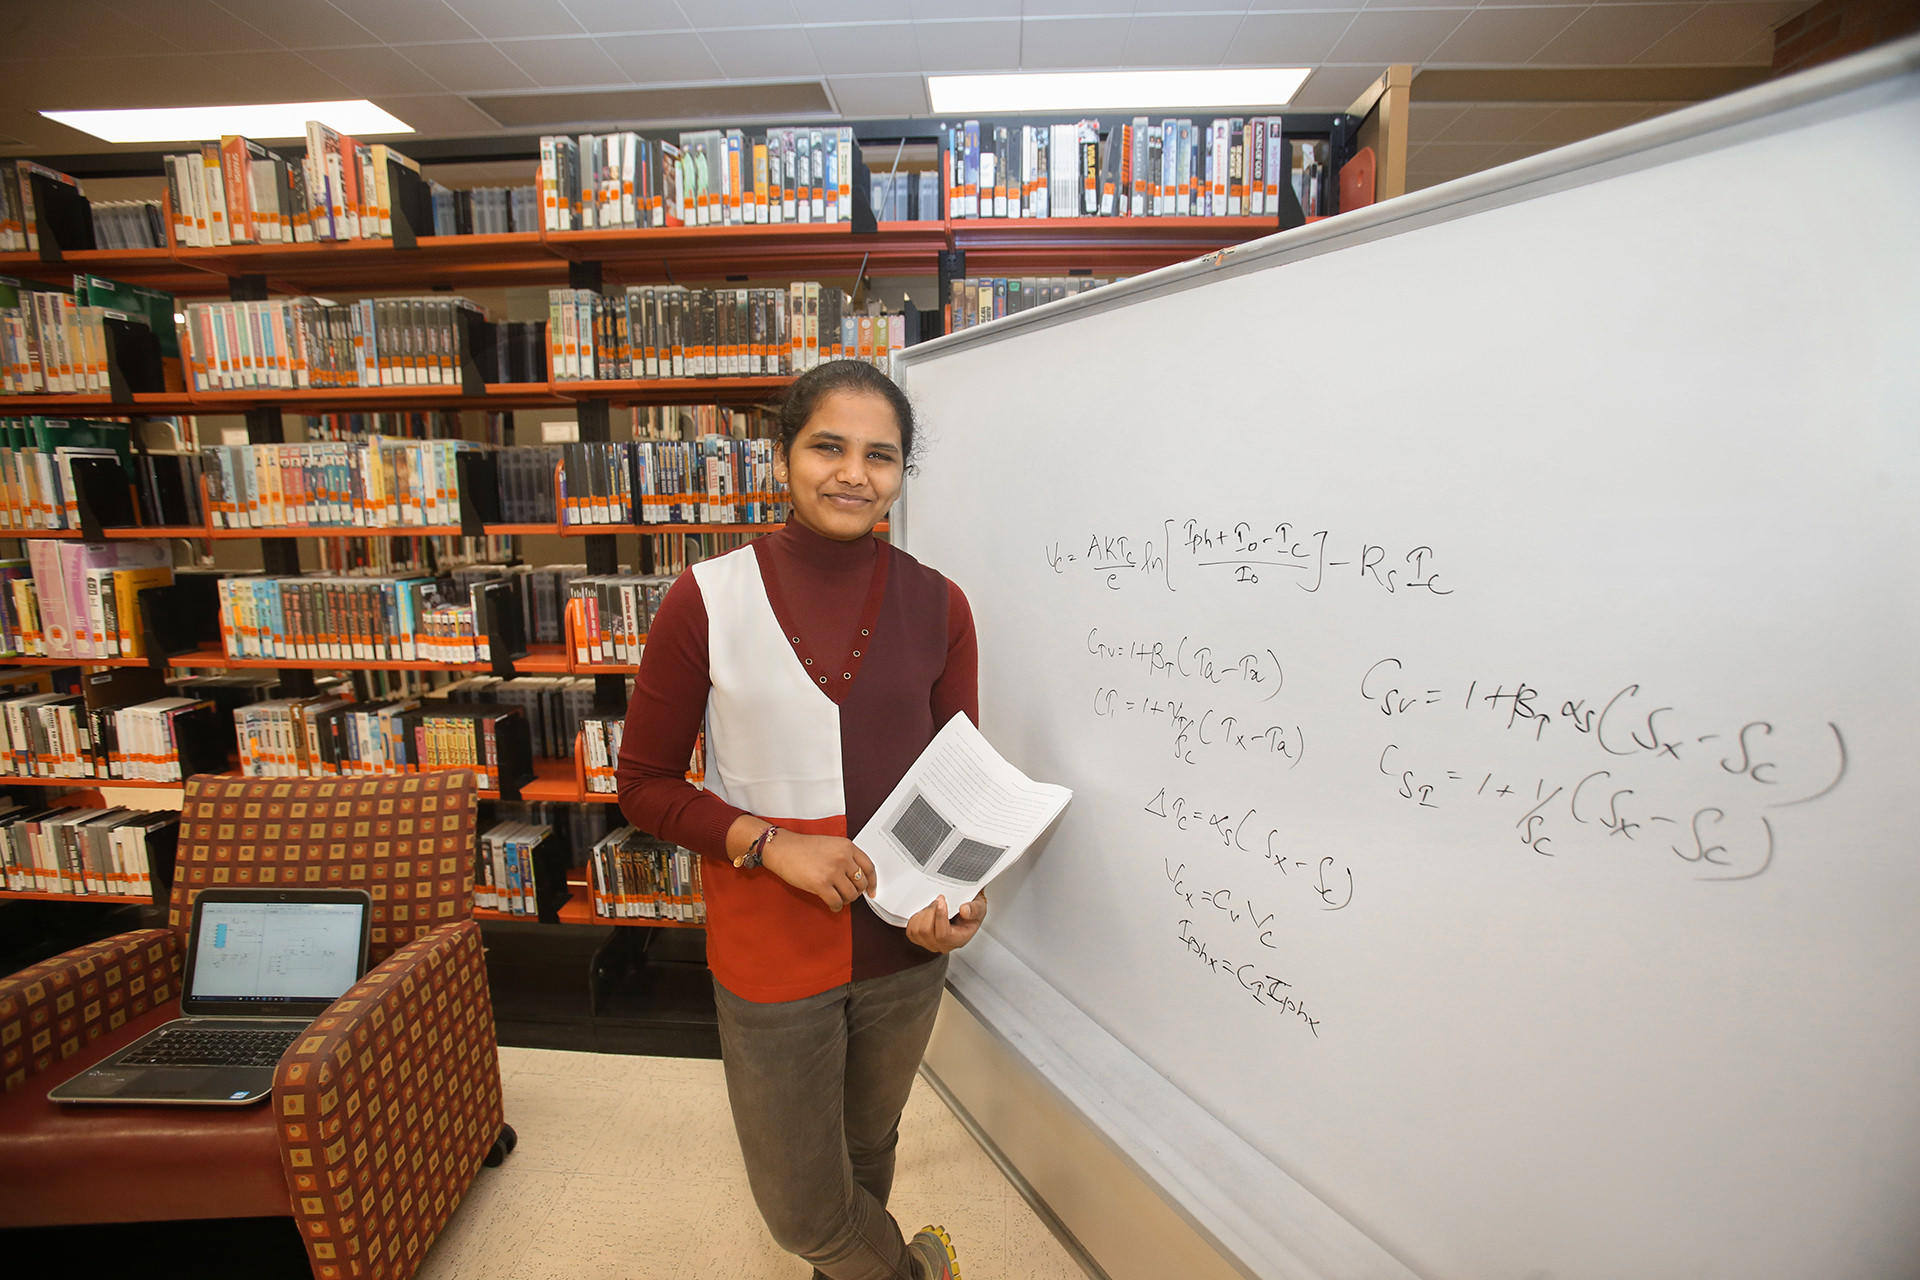 Yogitha Malkireddy of India curiosity from India to Bowling Green State University.